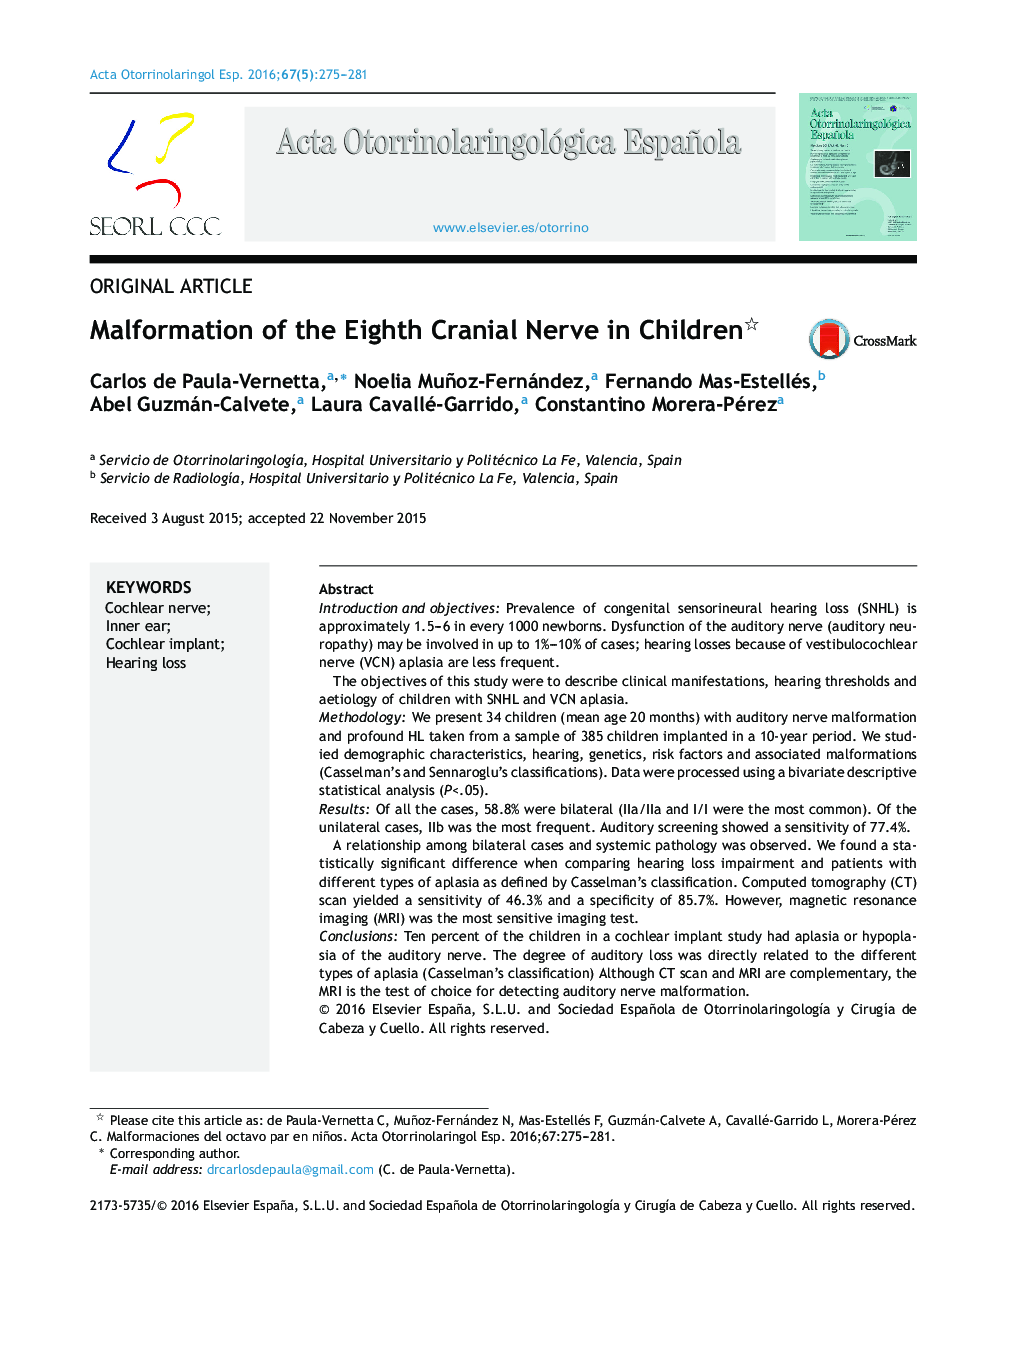 Malformation of the Eighth Cranial Nerve in Children